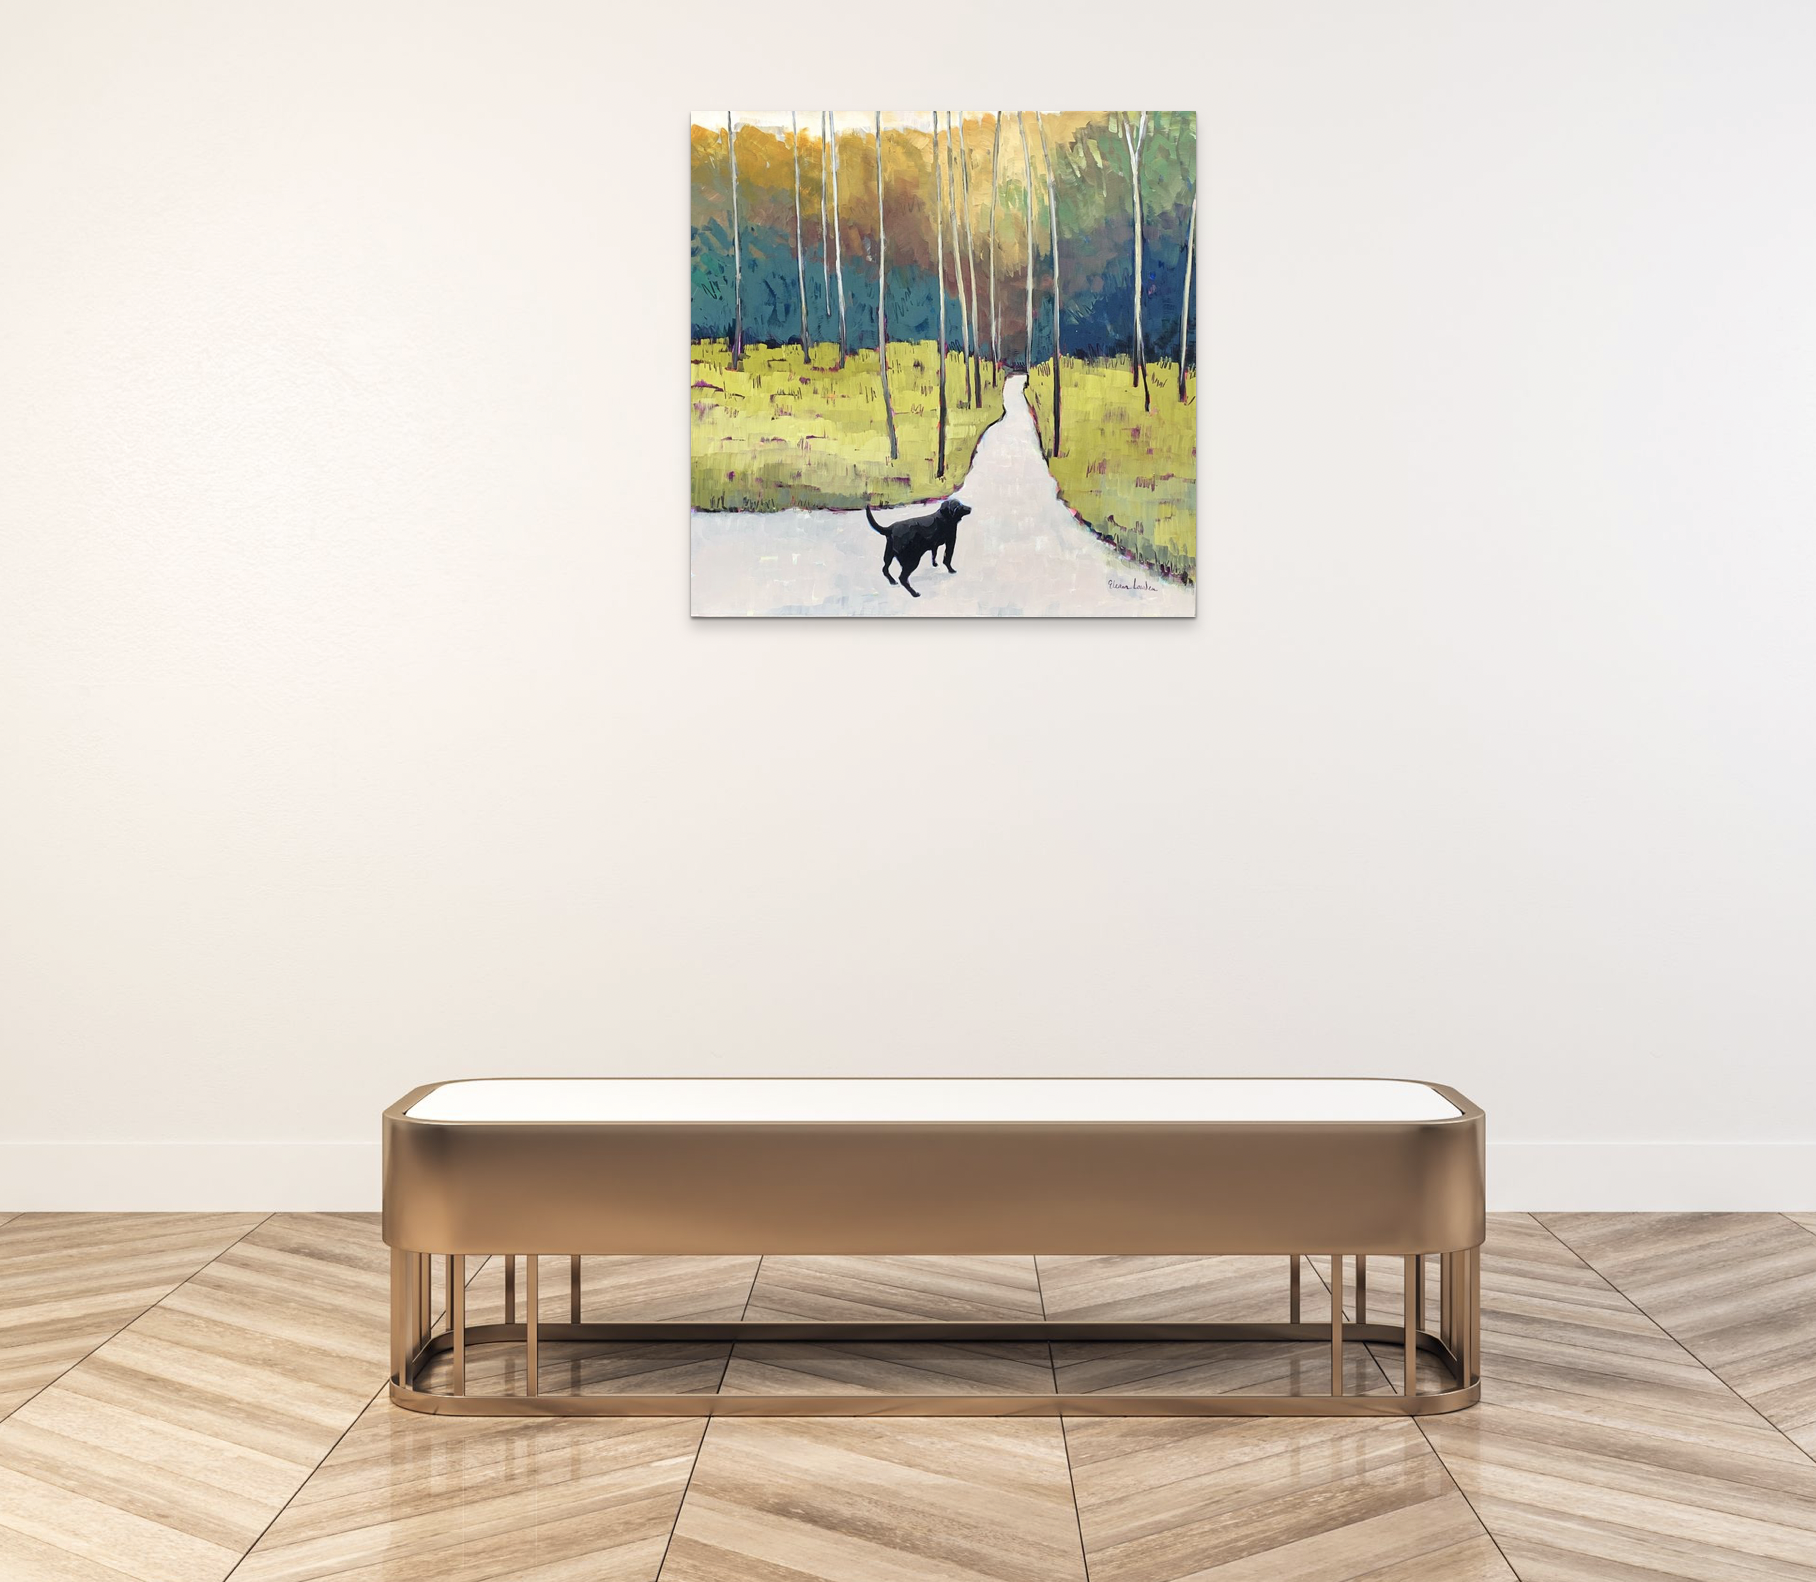 Black Dog, acrylic painting by Eleanor Lowden | Effusion Art Gallery + Cast Glass Studio, Invermere BC